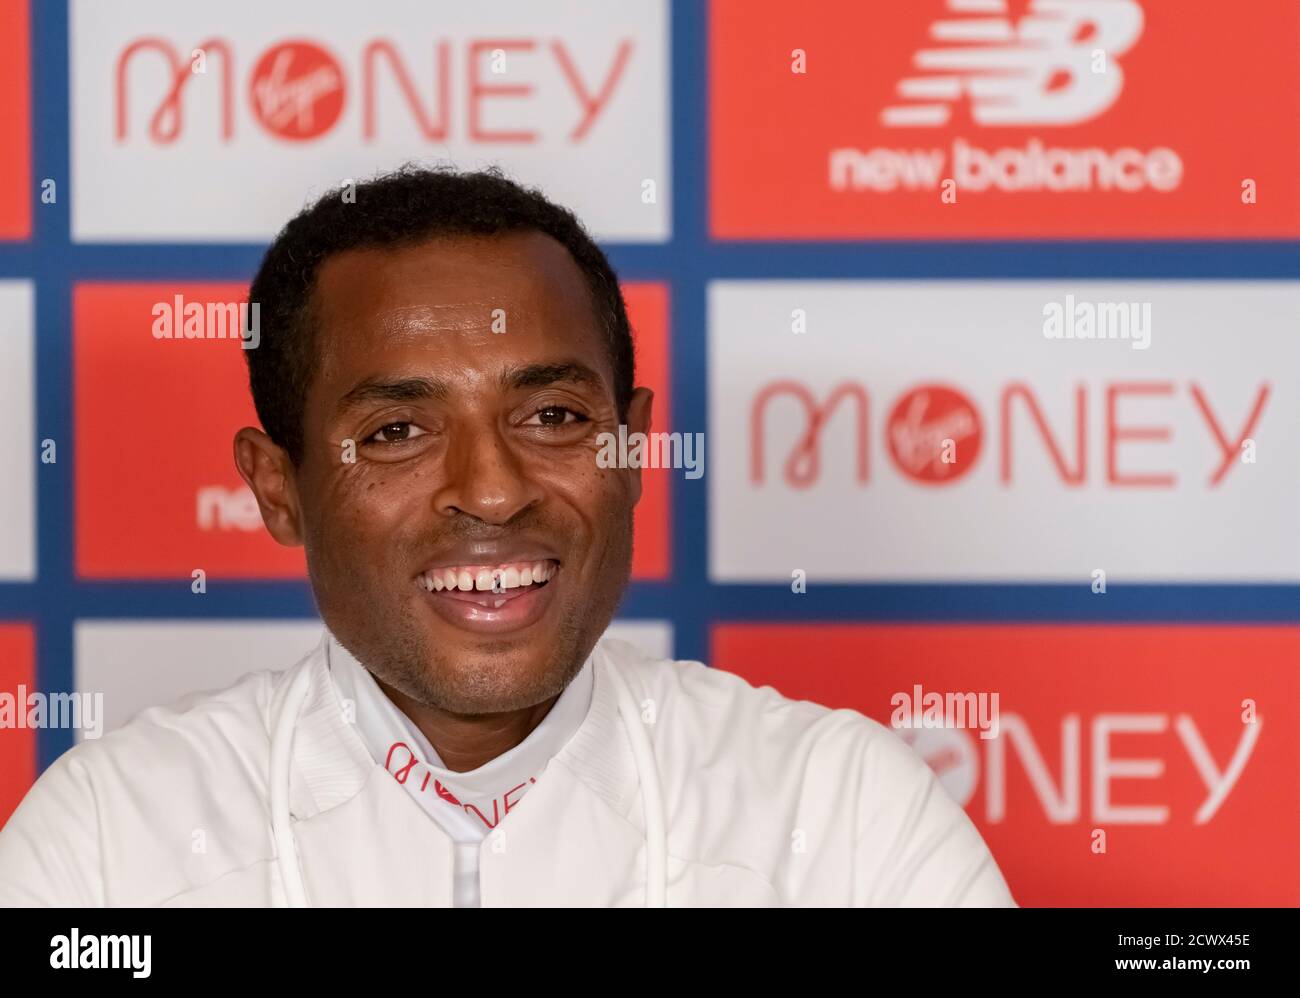 Ethiopia's Kenenisa Bekele speaks to the media via Zoom in a virtual and socially distanced press conference from inside the official hotel and biosecure bubble for the historic elite-only 2020 Virgin Money London Marathon on Sunday 4 October. The 40th Race will take place on a closed-loop circuit around St James's Park in central London. Stock Photo